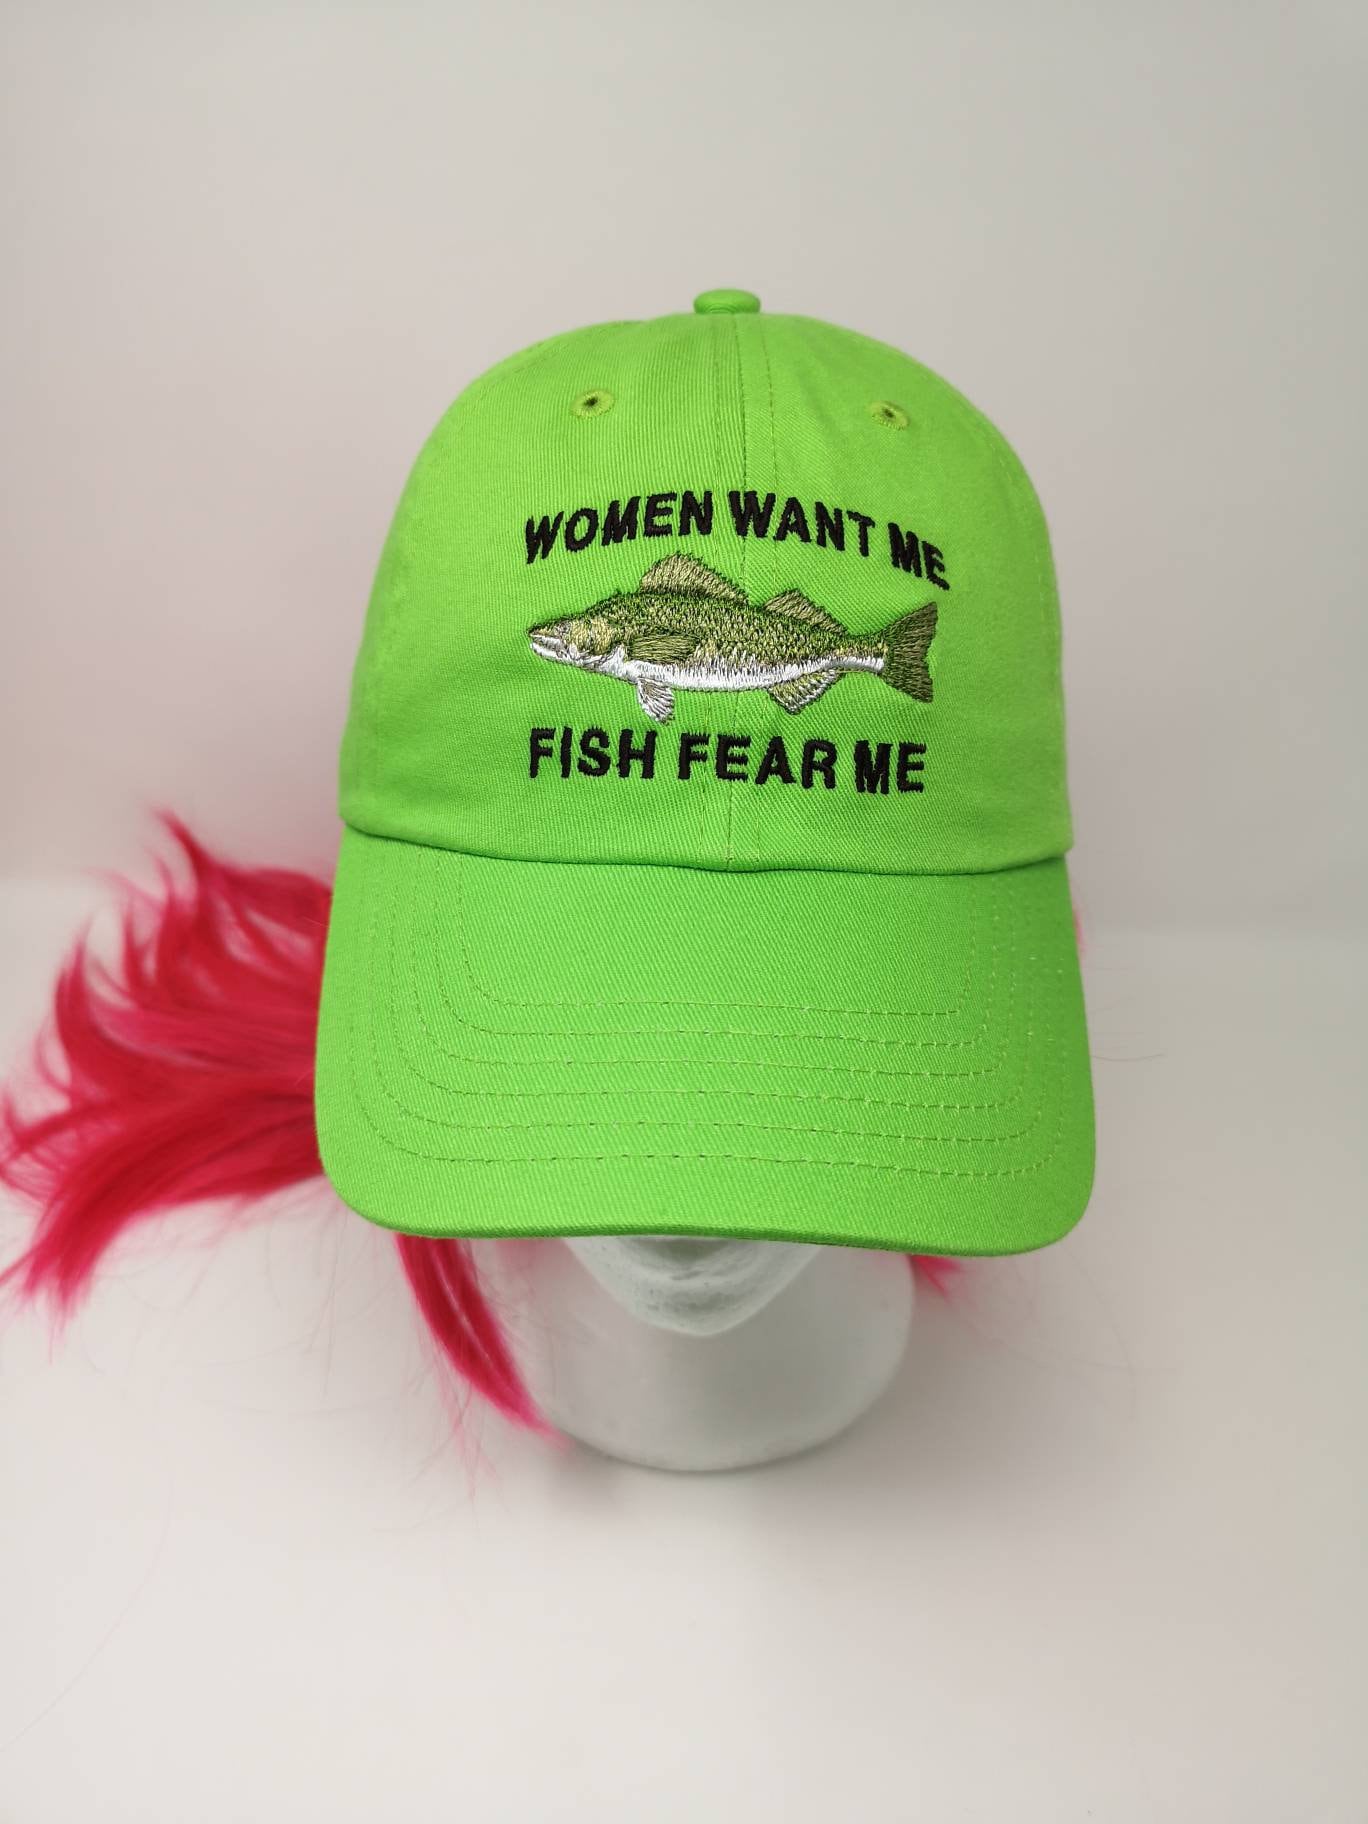 Women Want Me Fish Fear Me Hat, Humor Hats, Fishing Captain Hat,  Personalized Embroidered Name on Side, Fishing Gifts for Men, Fishing Hat 